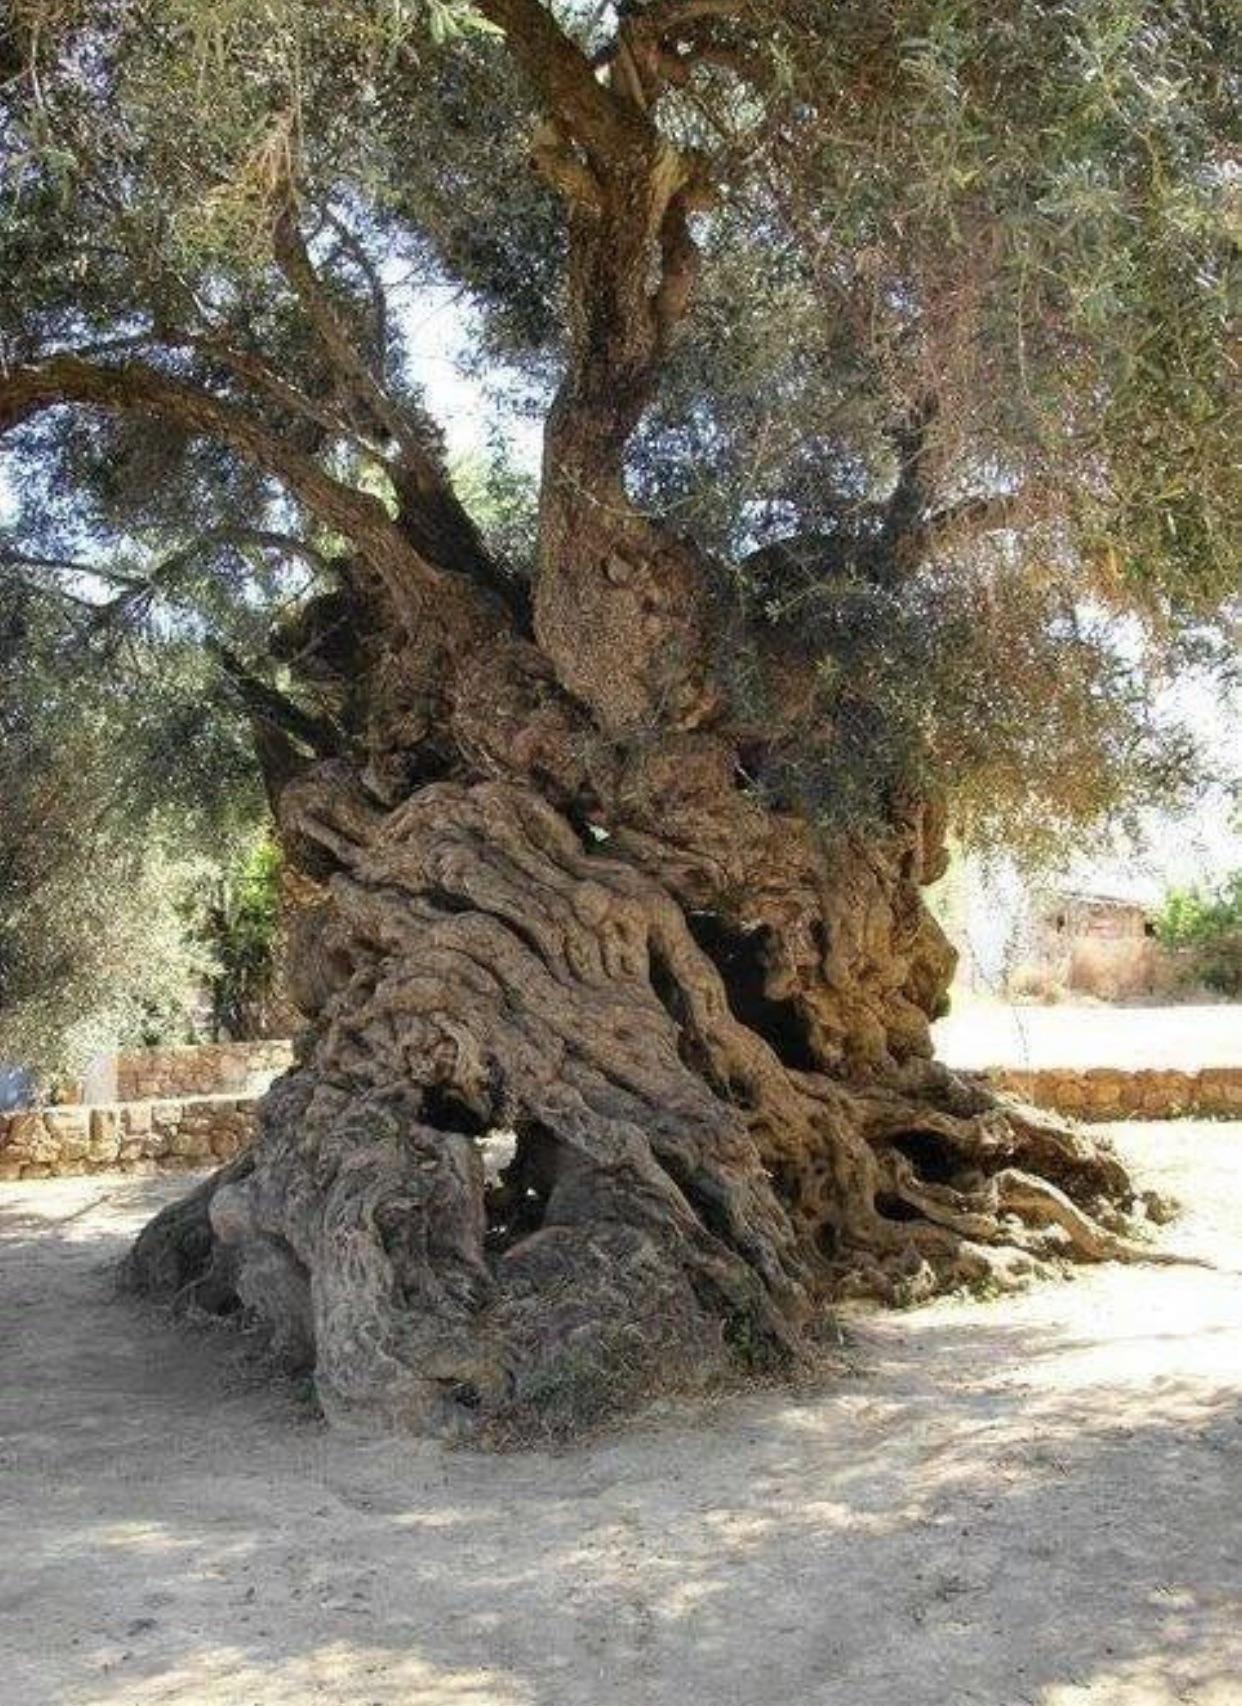 The+worlds+oldest+olive+tree%2C+estimated+to+be+over+3000+years+old.+Still+producing+olives+on+the+isle+of+Crete.